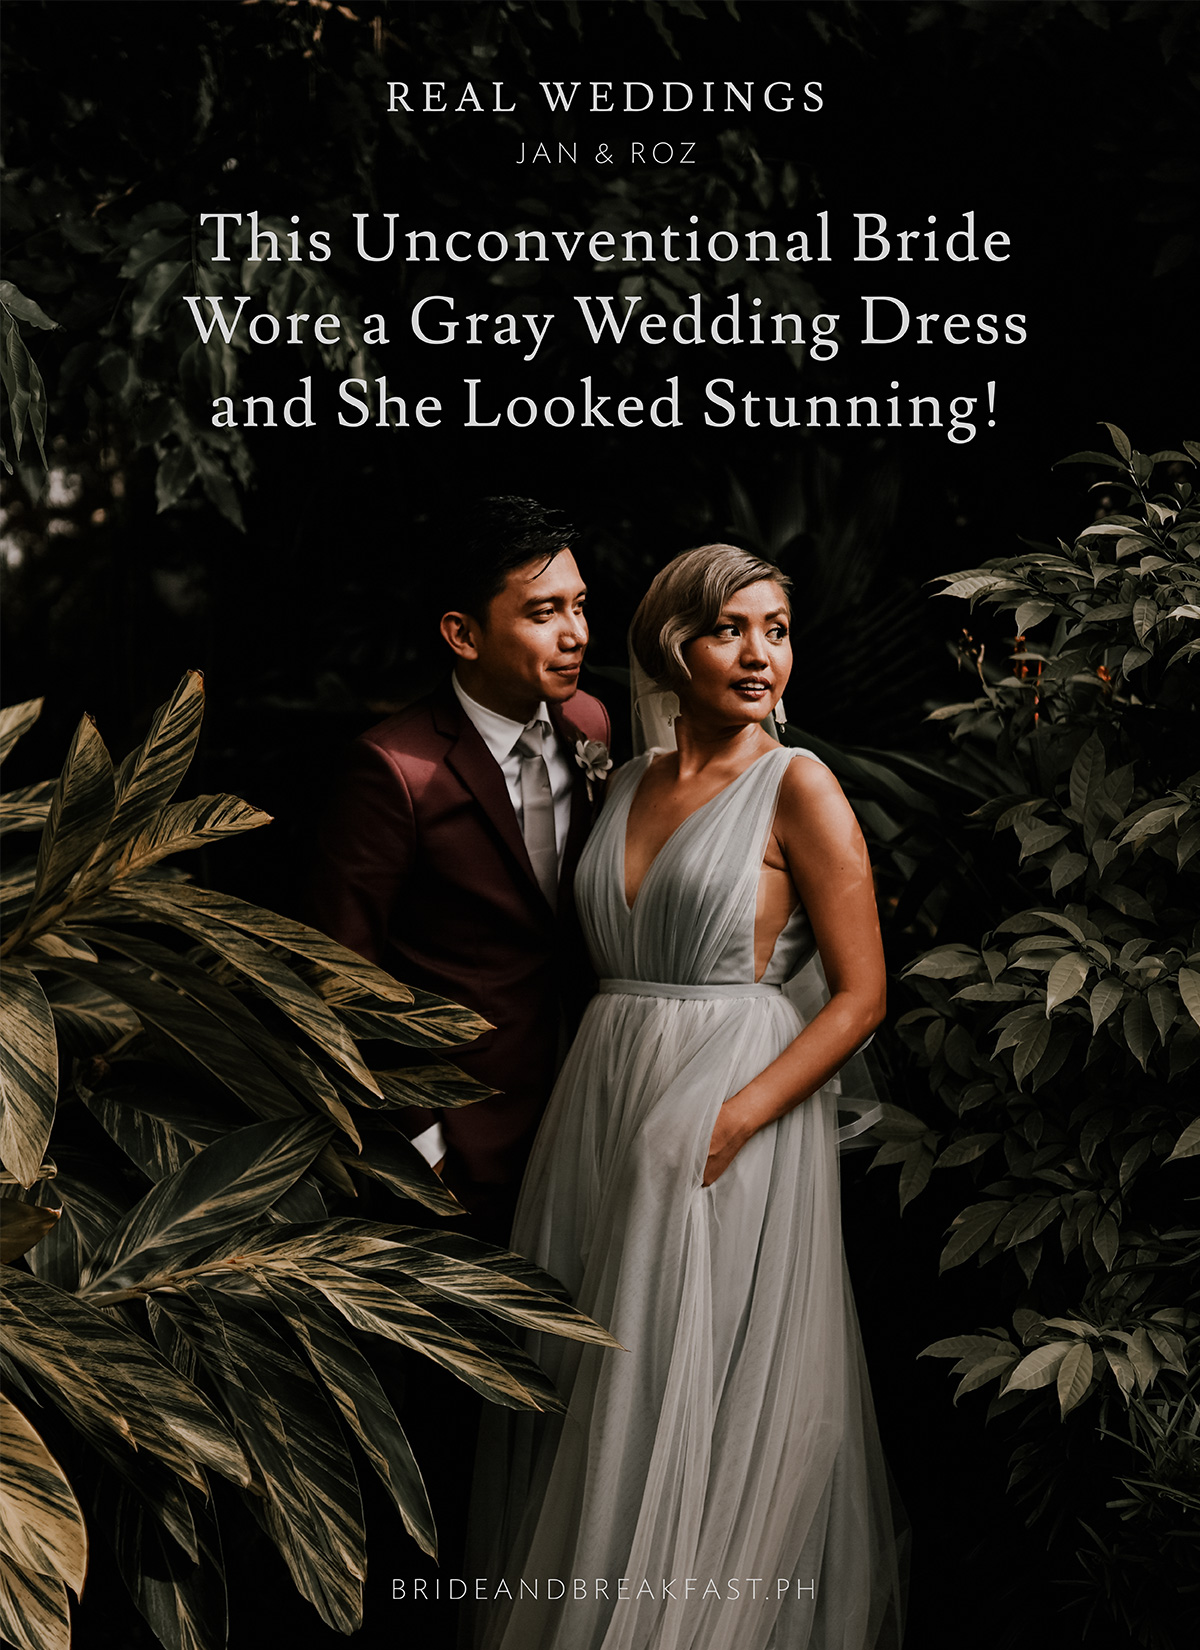 This Unconventional Bride Wore a Gray Wedding Dress and She Looked Stunning!